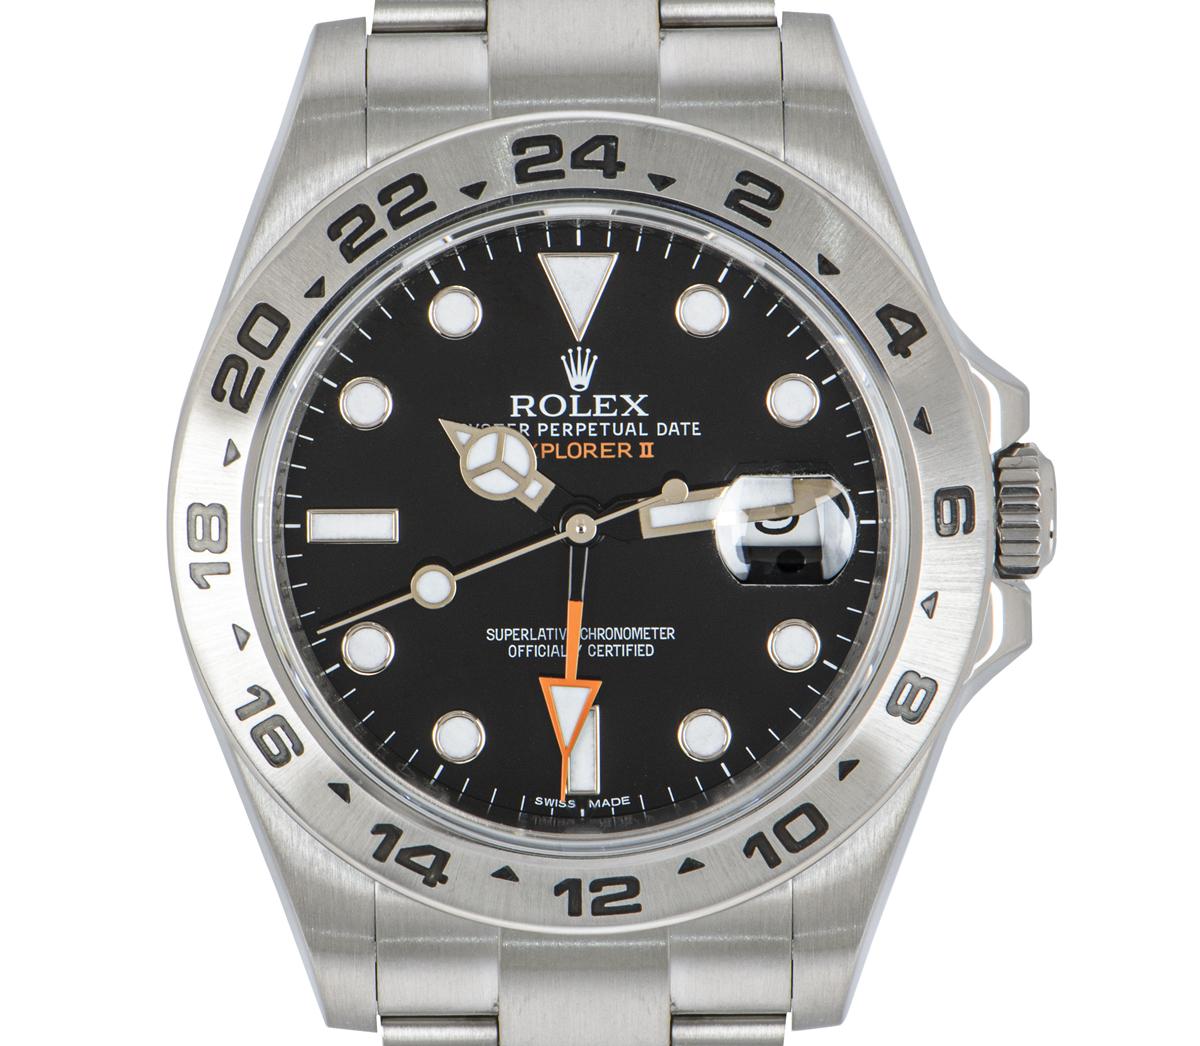 A men's Explorer II wristwatch in Oyster steel by Rolex. Featuring a black dial with applied hour markers, a date aperture, and an orange 24 hour hand. Complimenting the dial is a fixed stainless steel bezel with an engraved 24 hour display.

Fitted